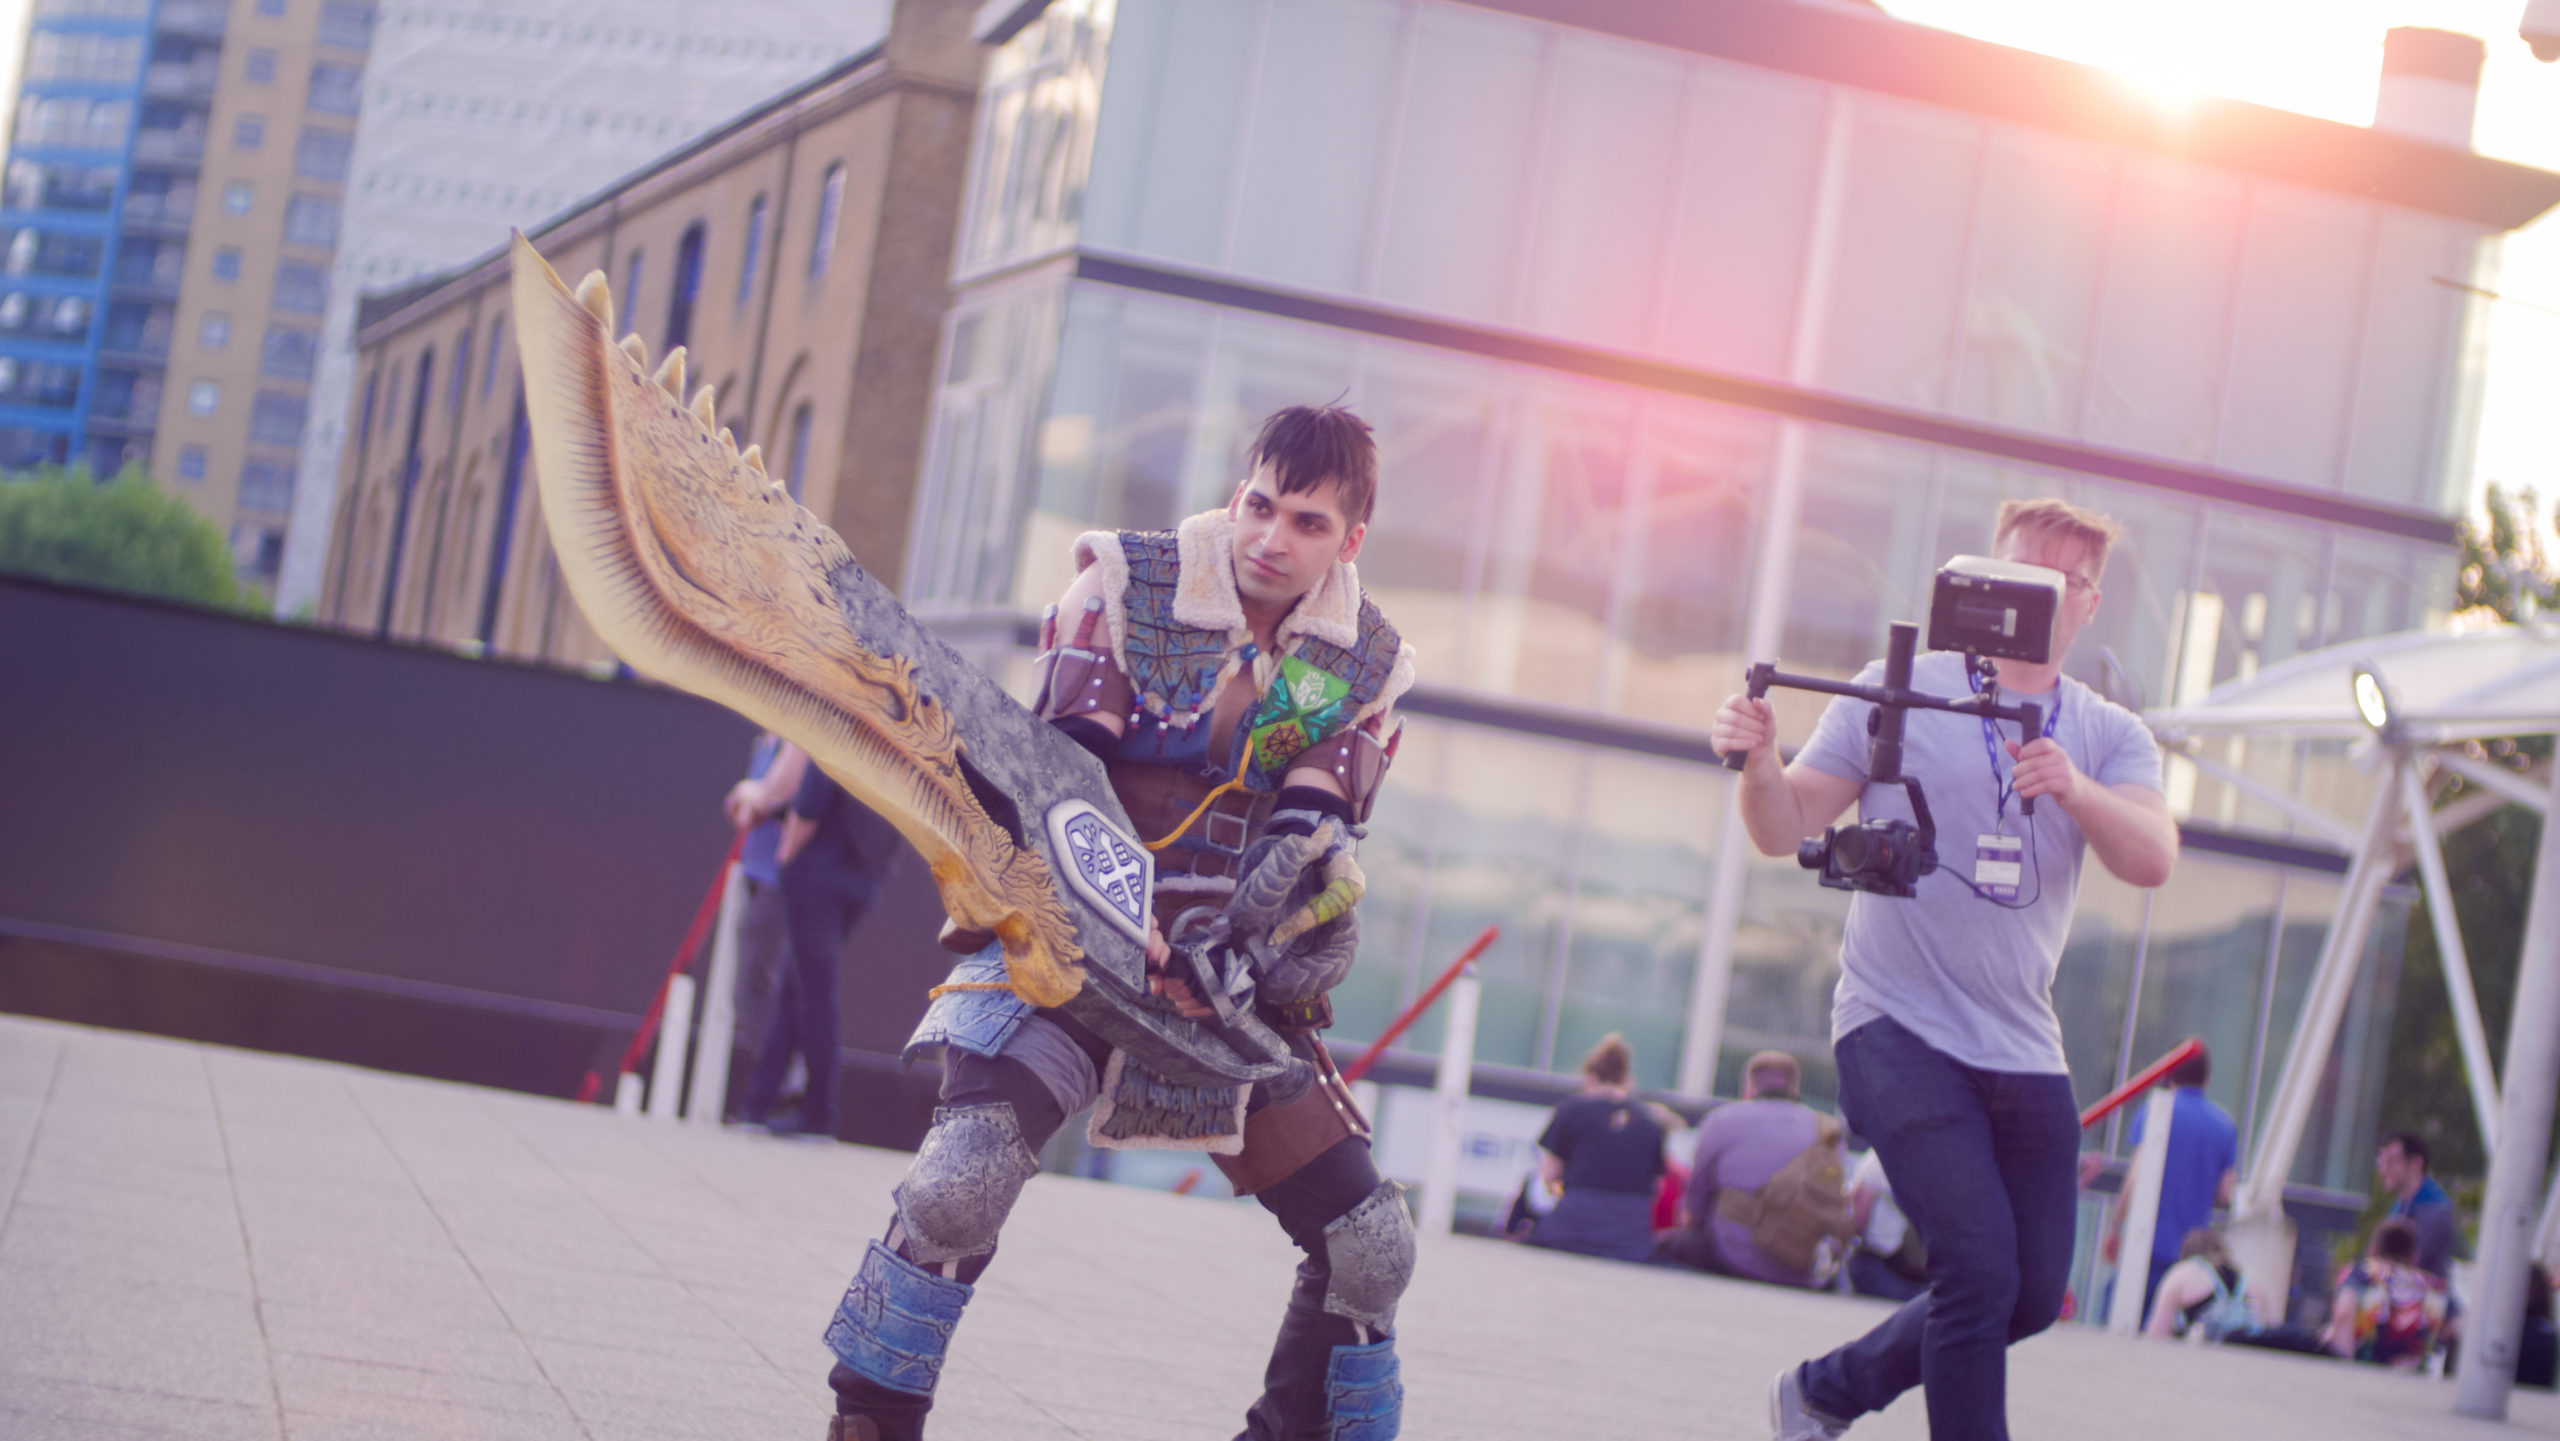 Man with a gimbal is filming at cosplayer at MCM Comic Con